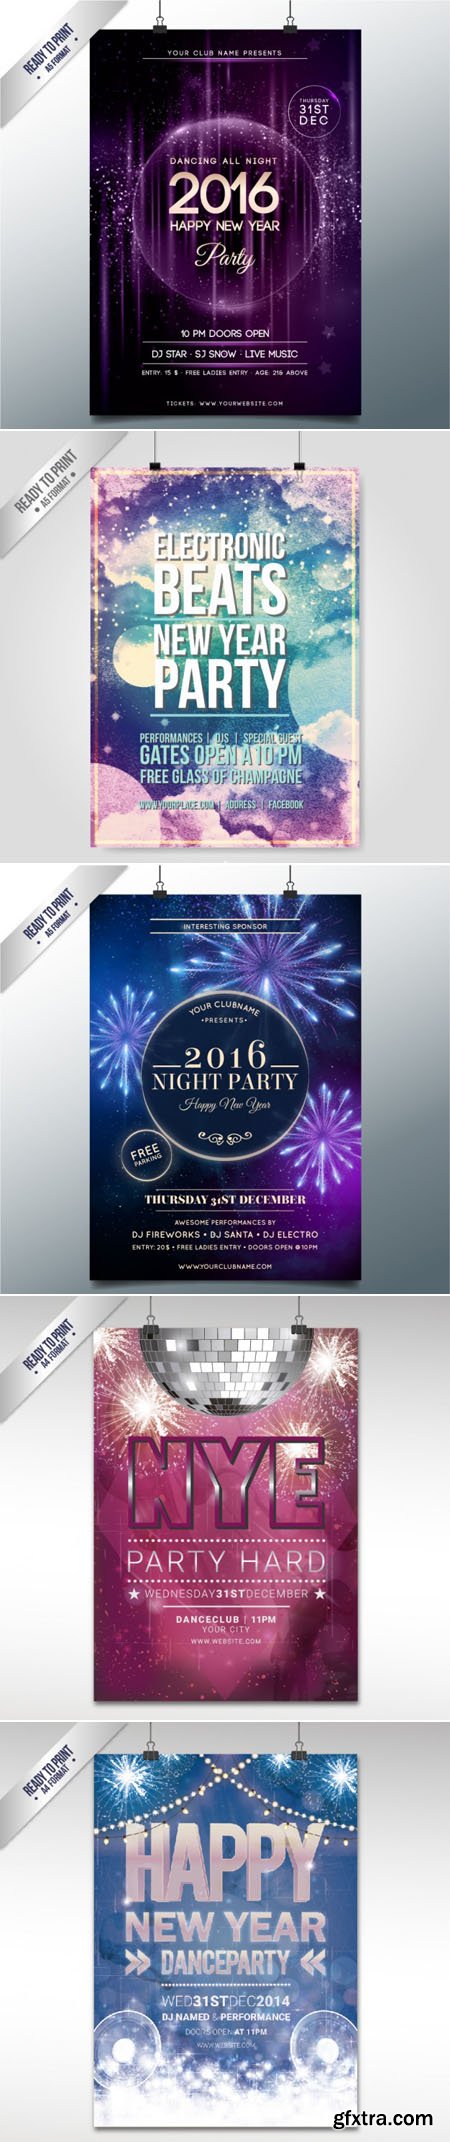 Purple New Year 2016 Party Posters Templates in Vector